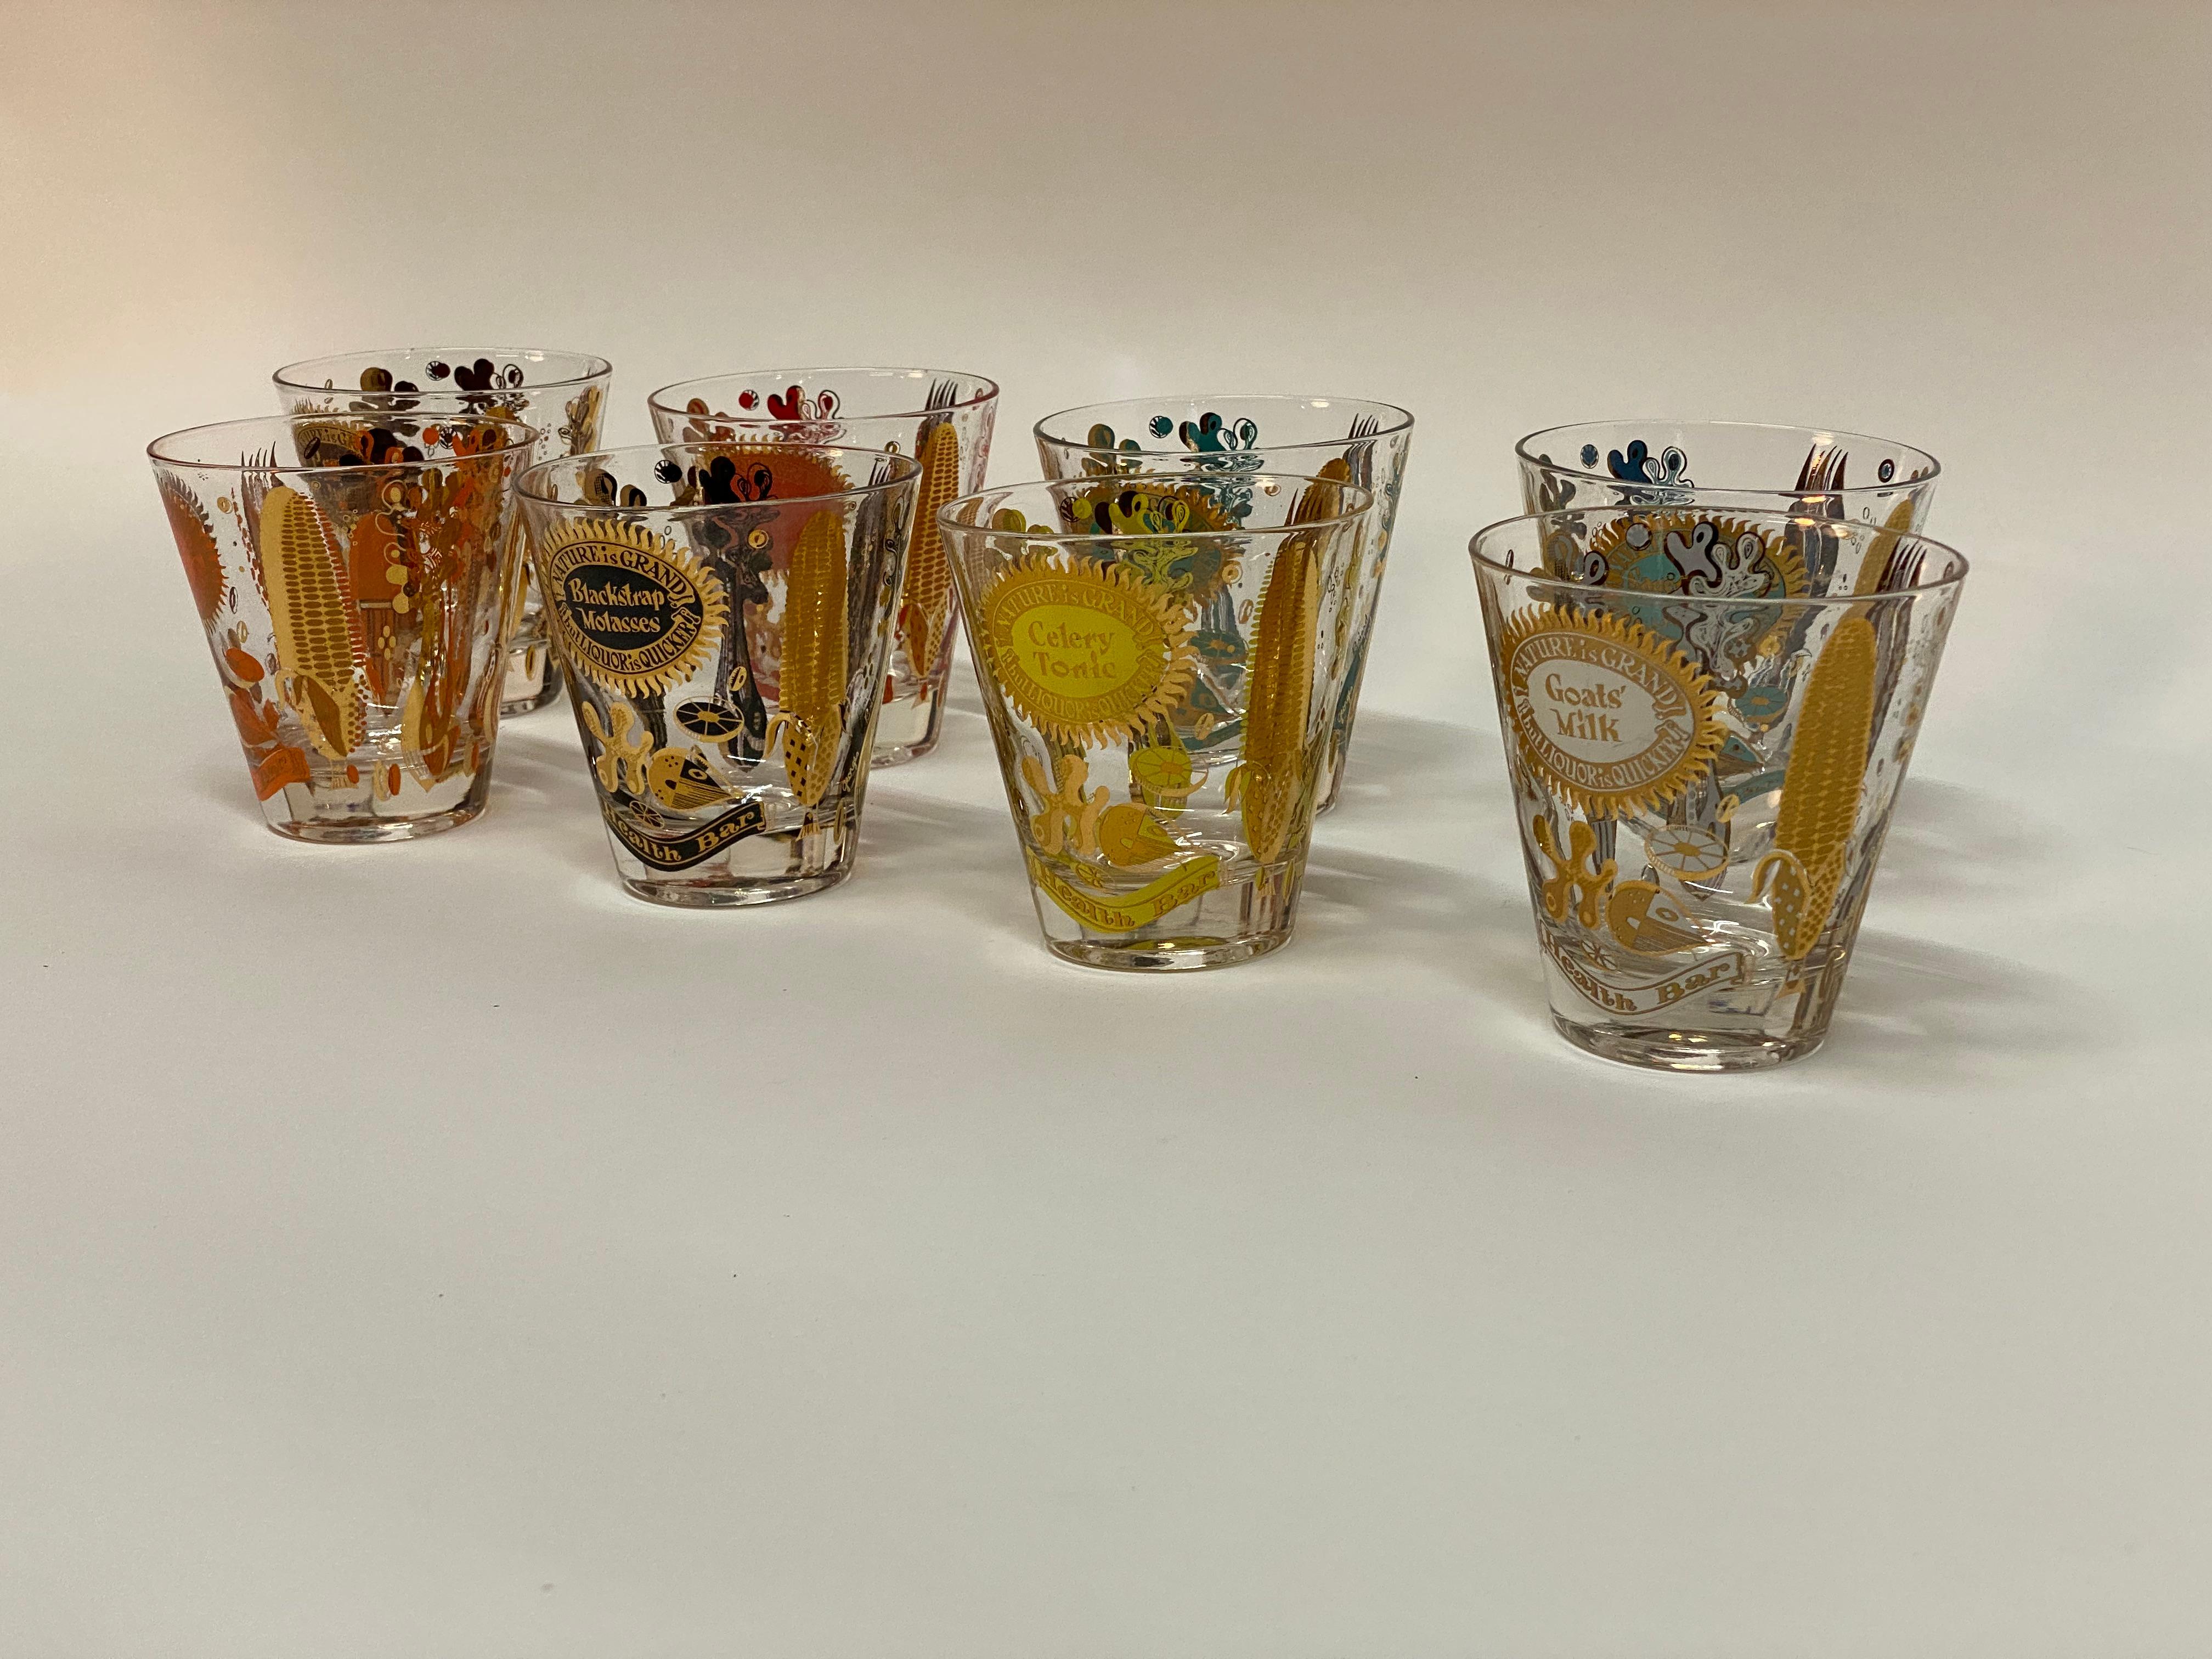 The finest cocktail glasses from Georges Briard. The set of eight glasses are all screen decorated, Nature is Grand, but Liquor is Quicker, Health Bar. The eight glasses include: Prune Juice, Apple Juice, Sauerkraut Juice, Carrot Juice, Goats' Milk,